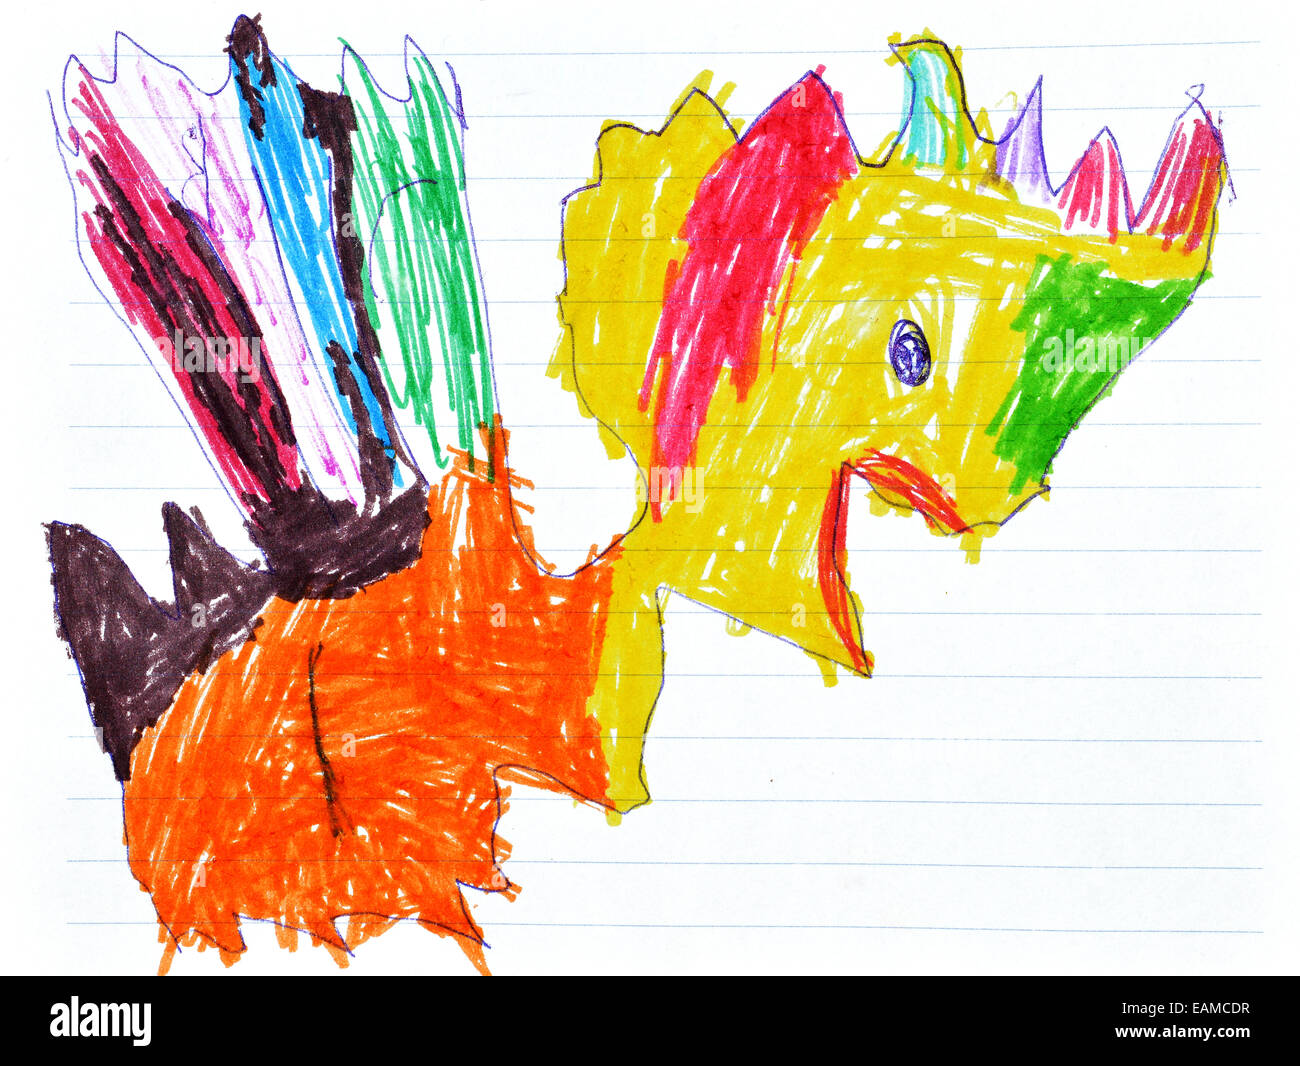 https://c8.alamy.com/comp/EAMCDR/kids-drawings-a-illustration-with-markers-EAMCDR.jpg